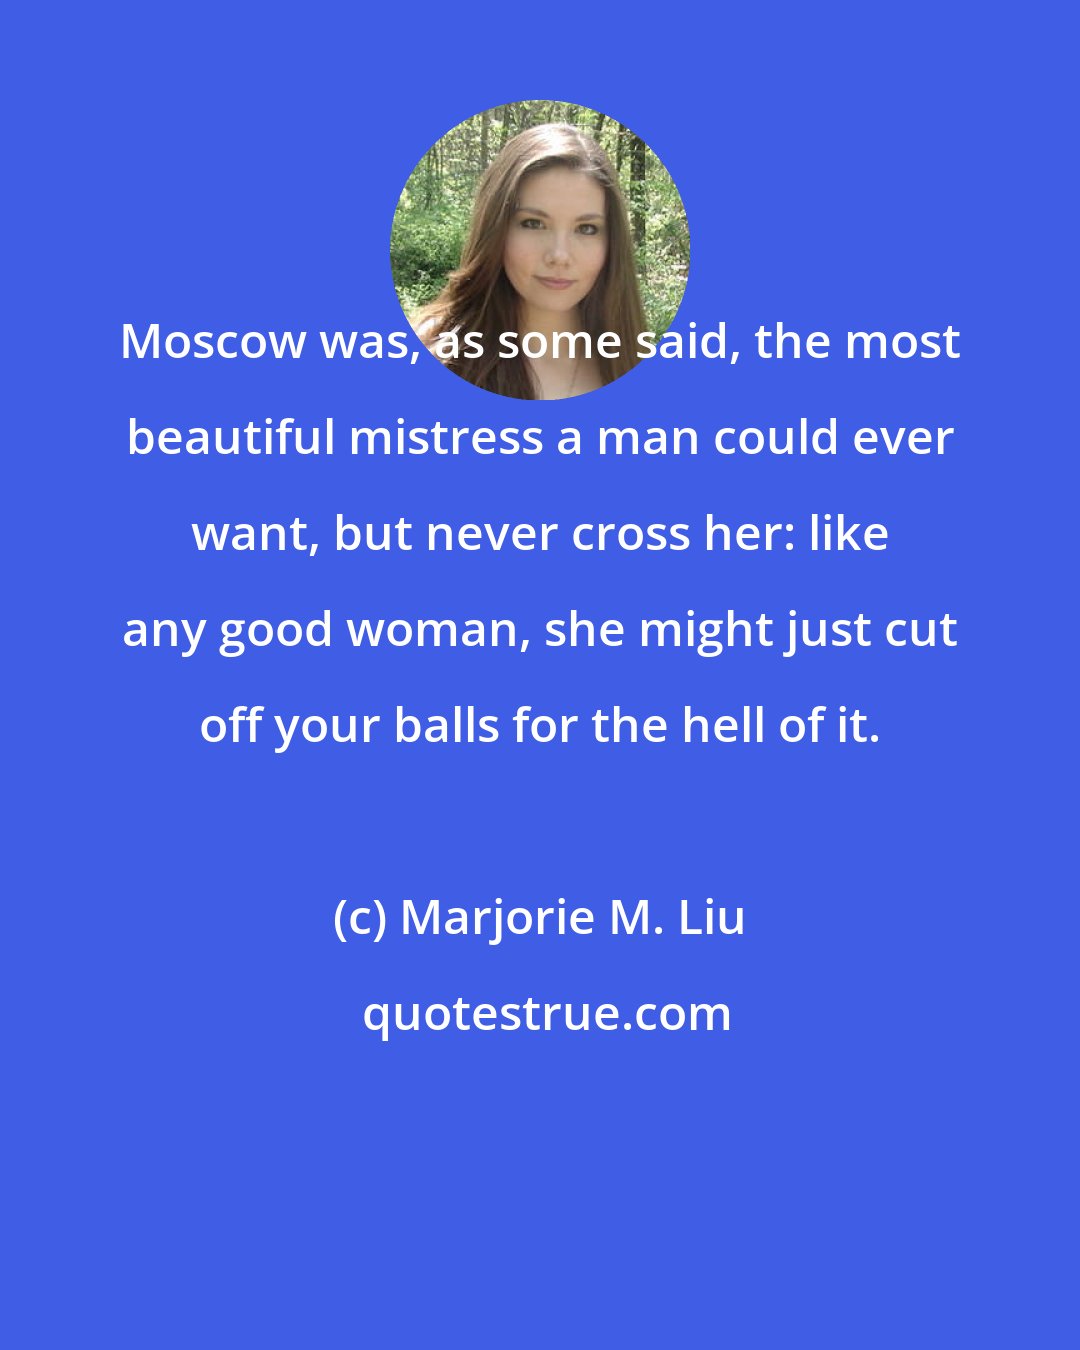 Marjorie M. Liu: Moscow was, as some said, the most beautiful mistress a man could ever want, but never cross her: like any good woman, she might just cut off your balls for the hell of it.